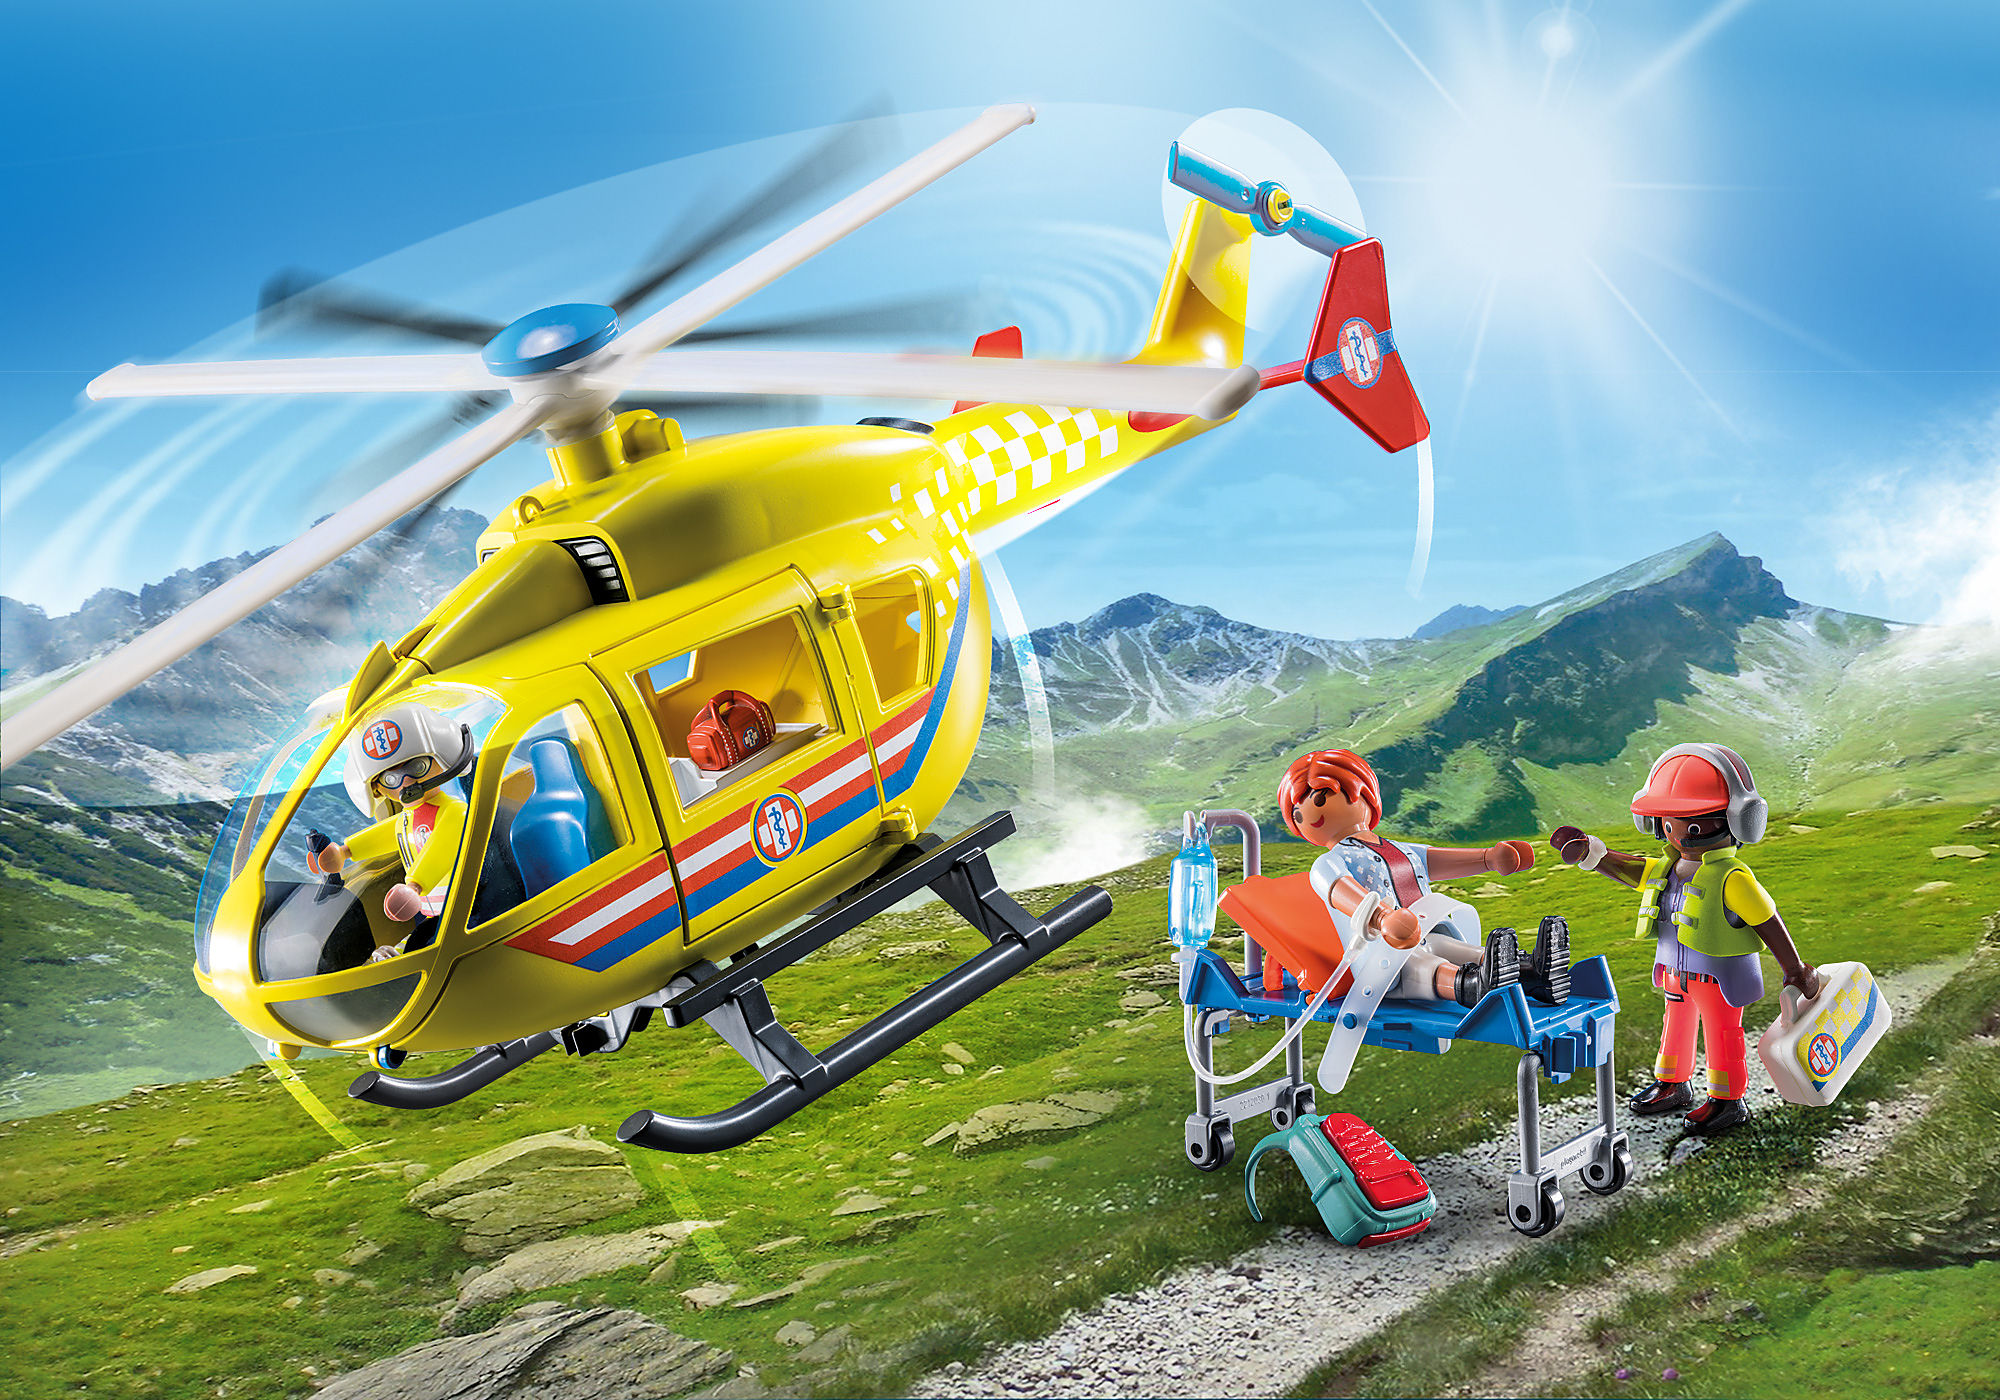 Medical Helicopter - PLAYMOBIL®